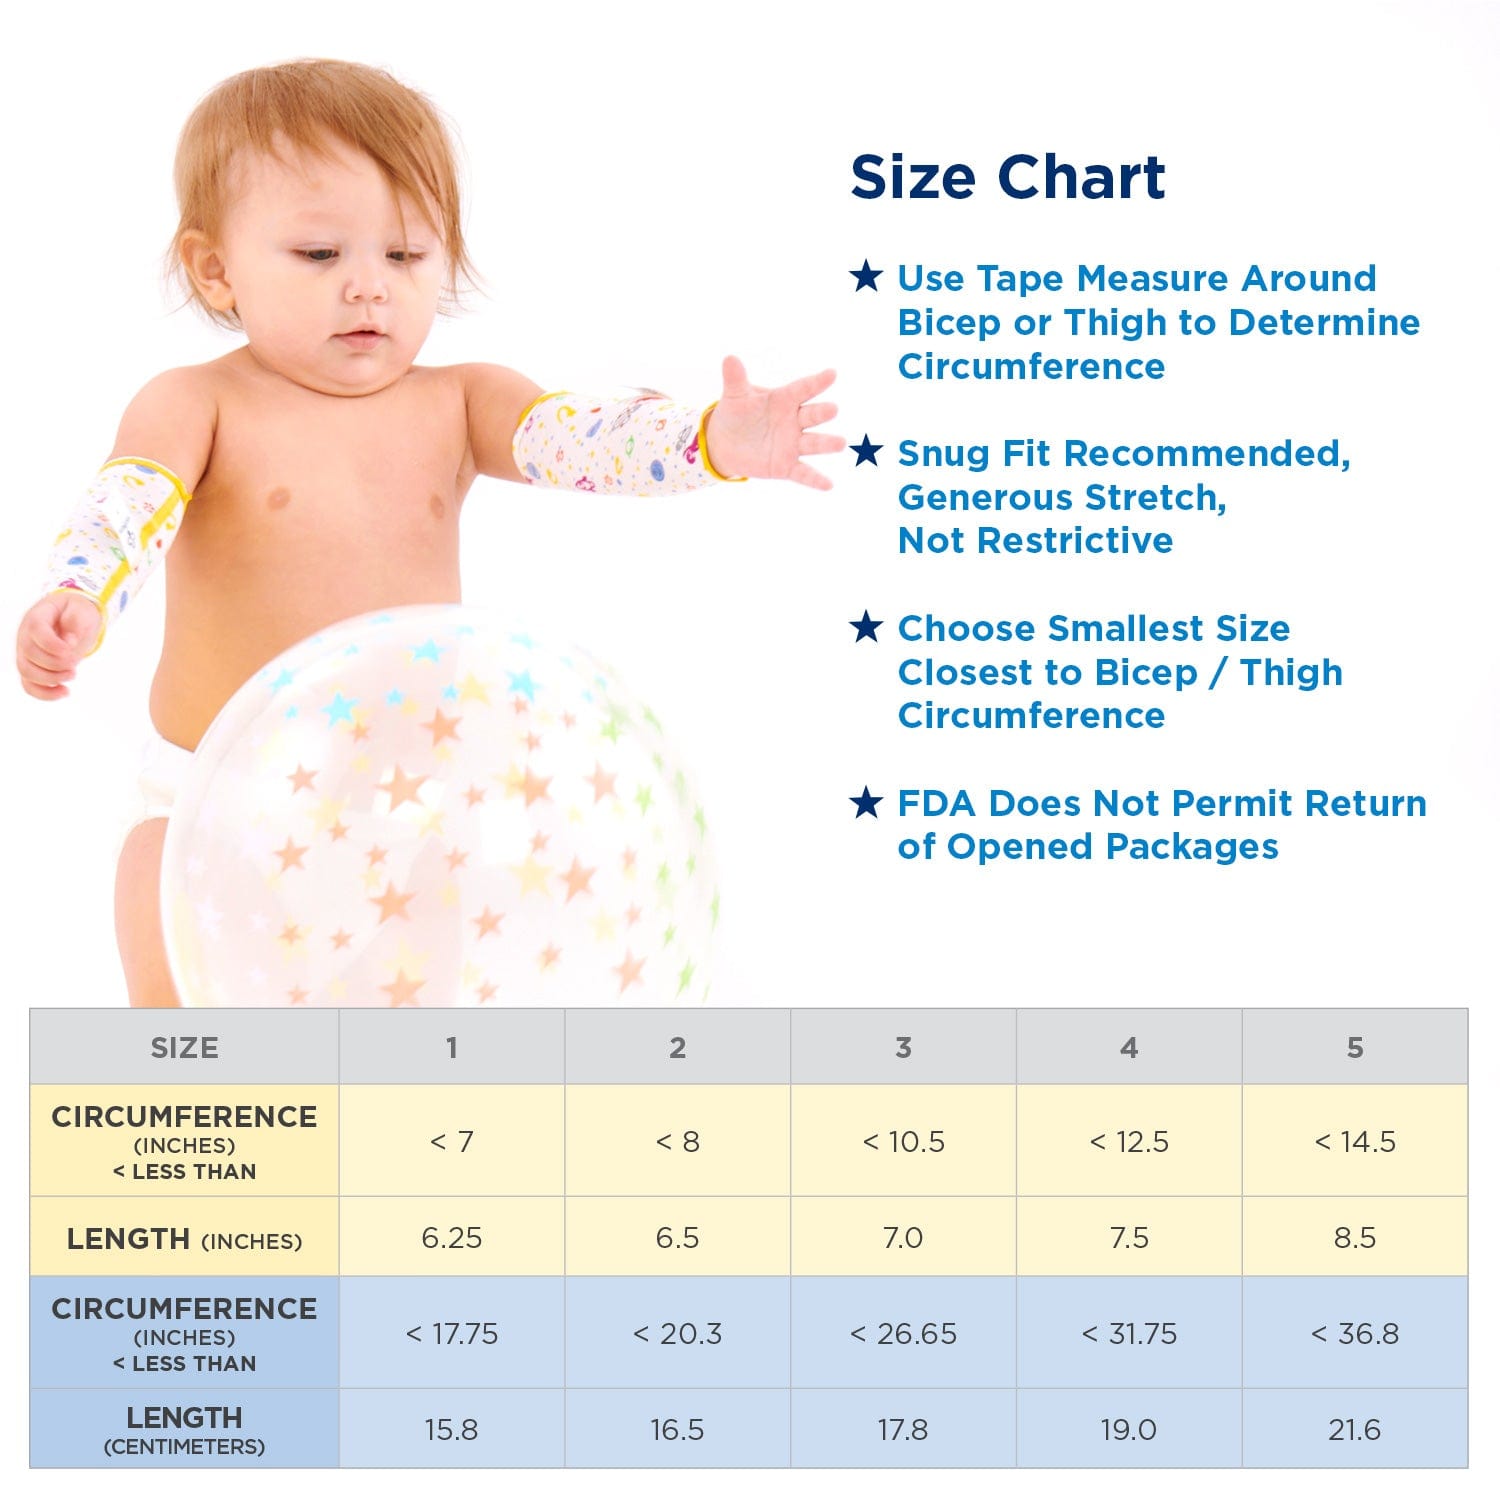 "Baby Eczema Sleeves are sized based on circumference of arm or leg"